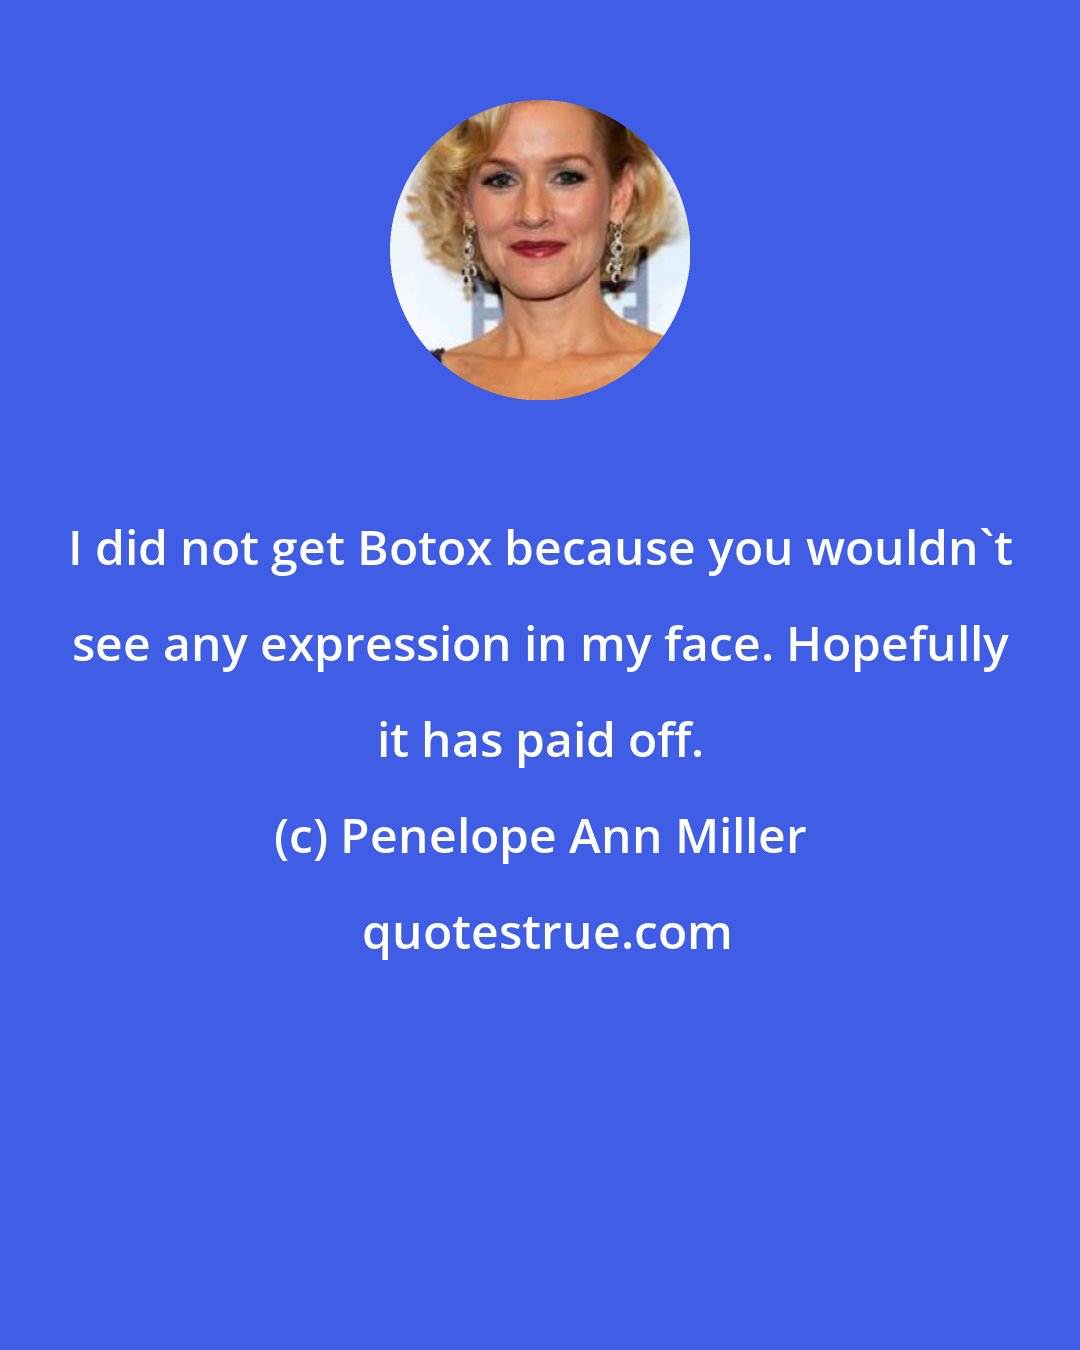 Penelope Ann Miller: I did not get Botox because you wouldn't see any expression in my face. Hopefully it has paid off.